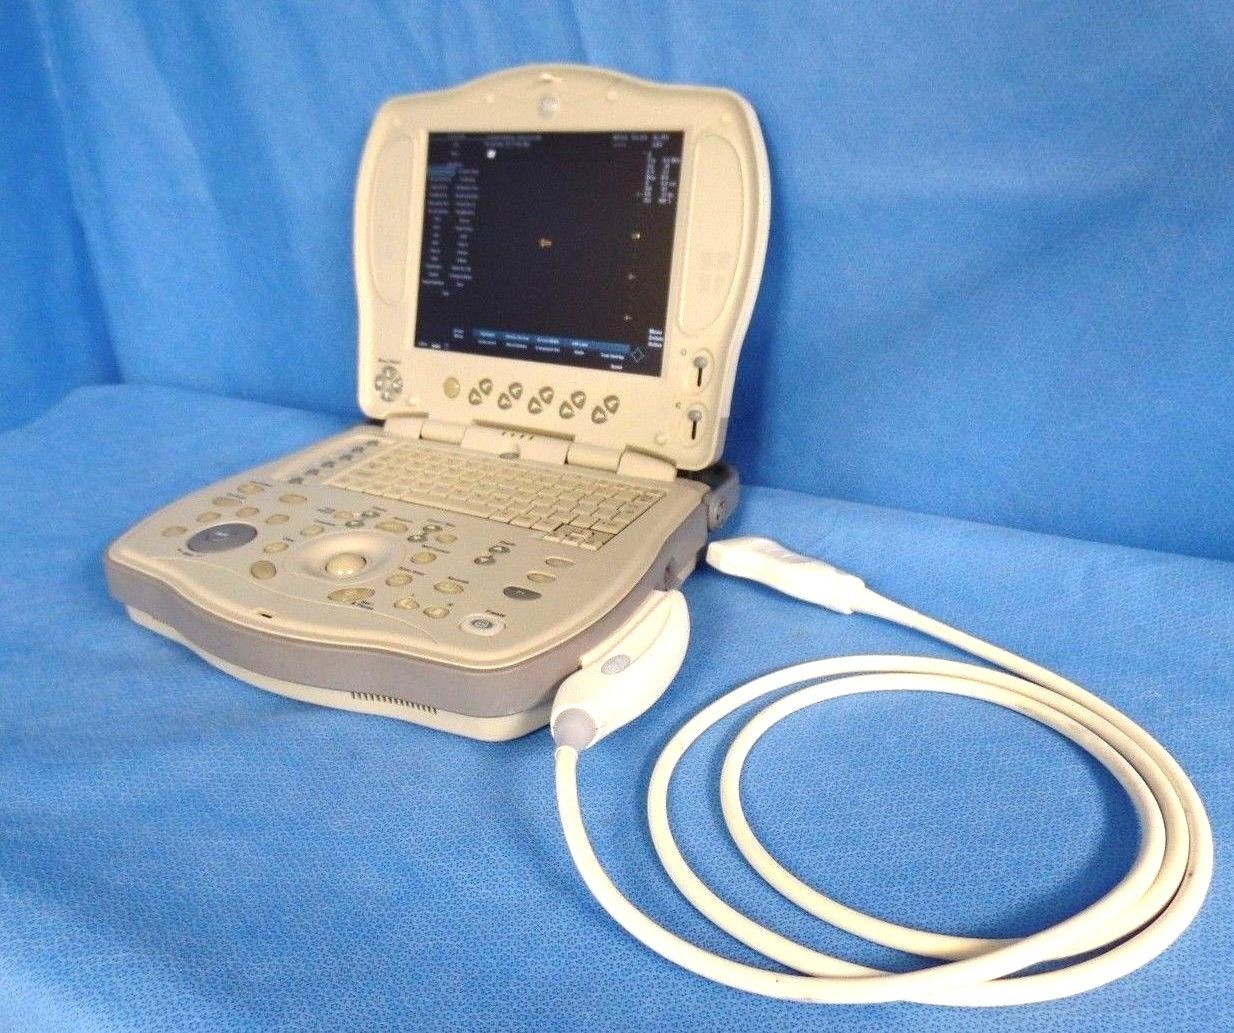 GE Logiq Book XP Ultrasound SV 2.0 with 8L-RS Probe DOM 2005 DIAGNOSTIC ULTRASOUND MACHINES FOR SALE